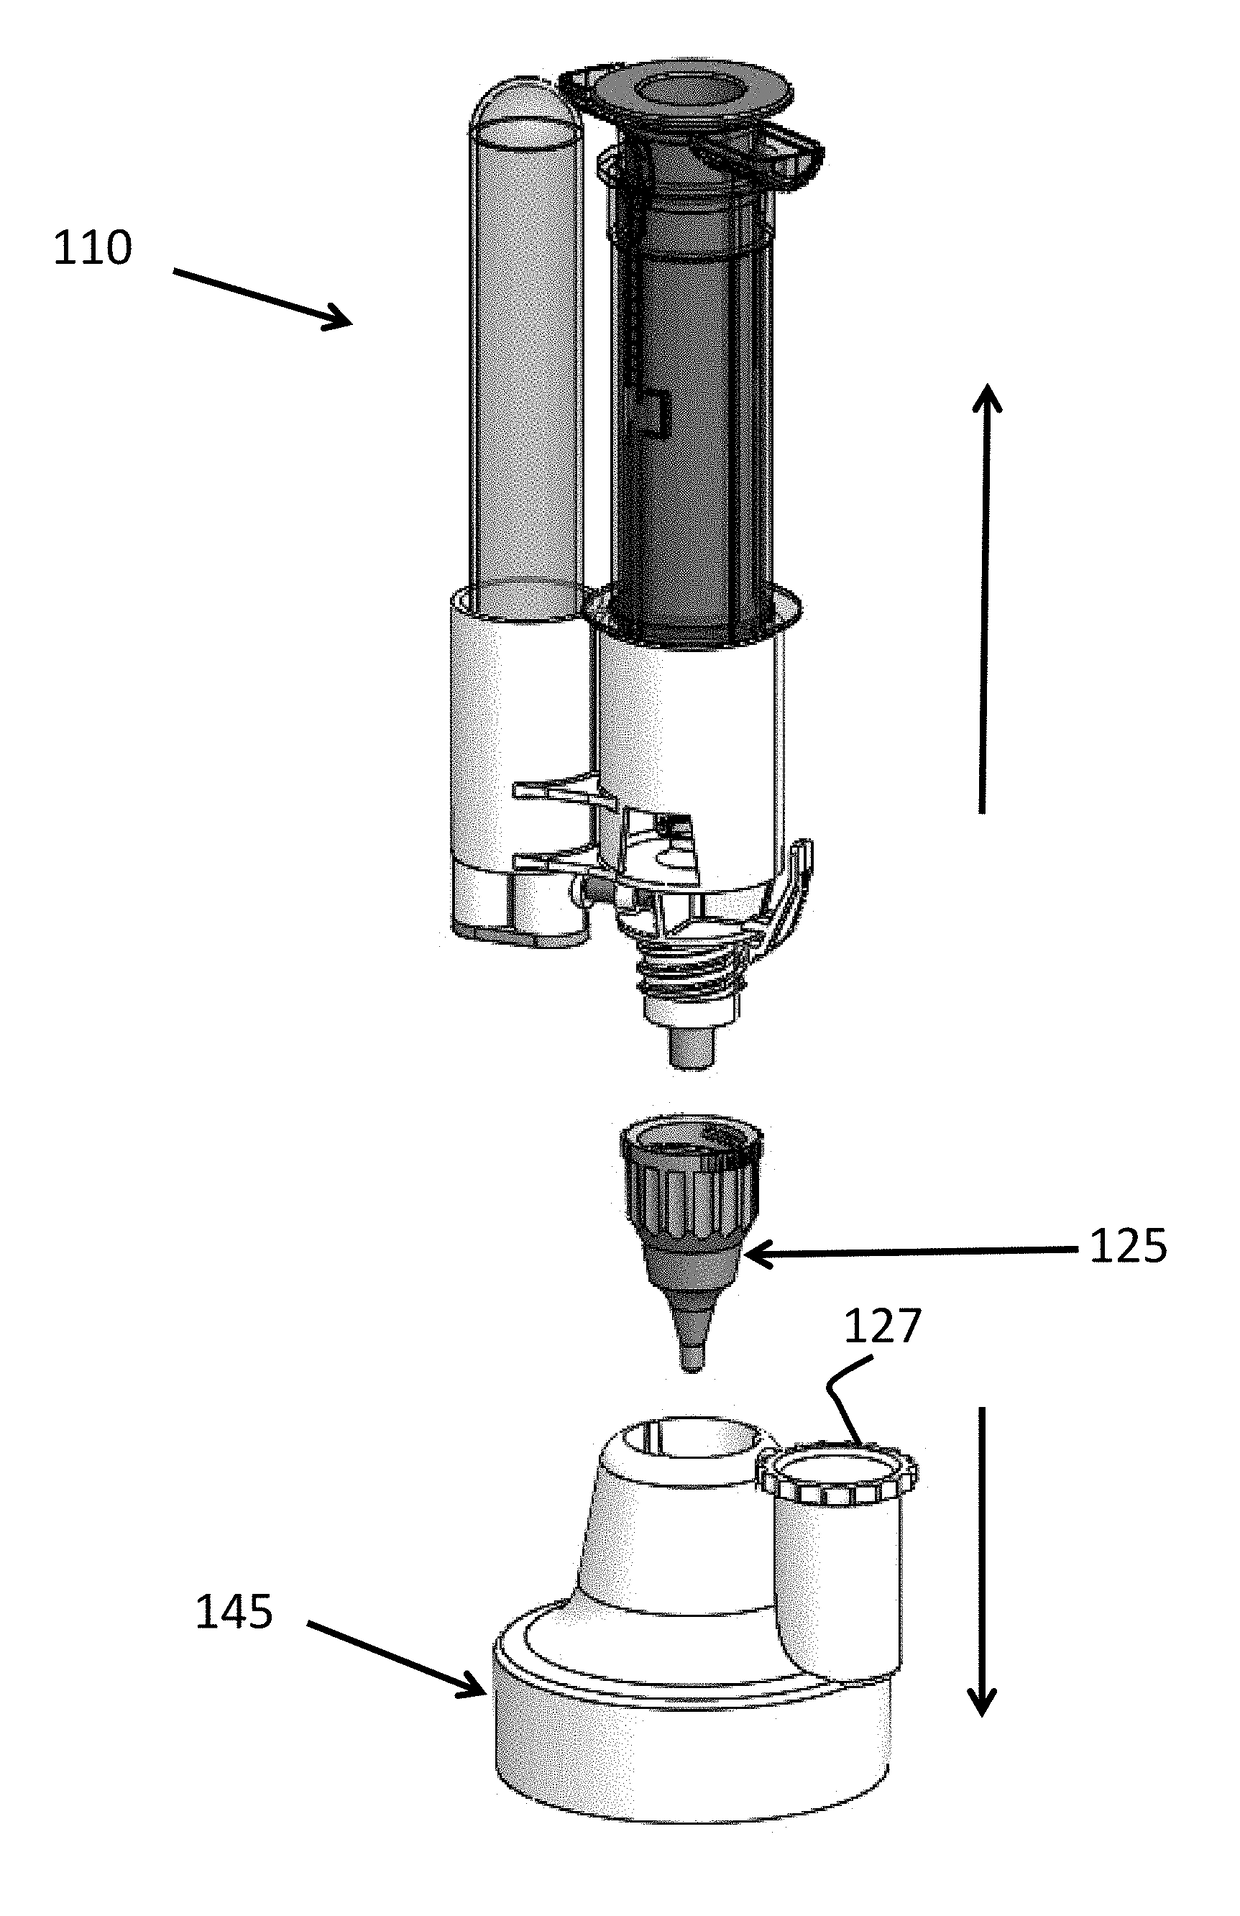 Apparatus and method for extracting pathogens from biological samples